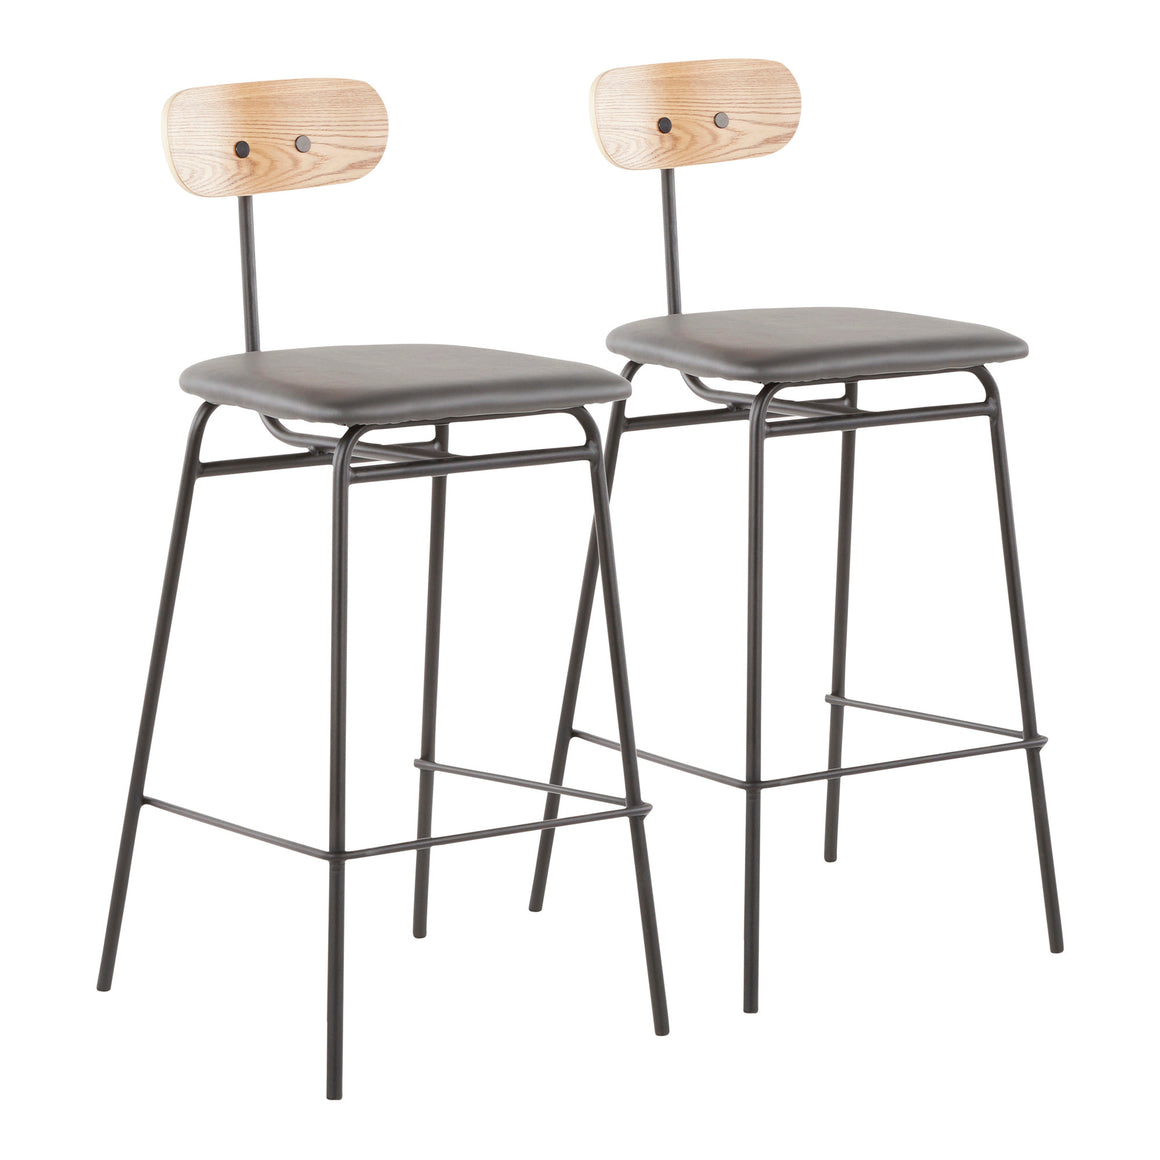 Elio Contemporary Counter Stool in Black Metal, Grey Faux Leather and Natural Wood by LumiSource - Set of 2